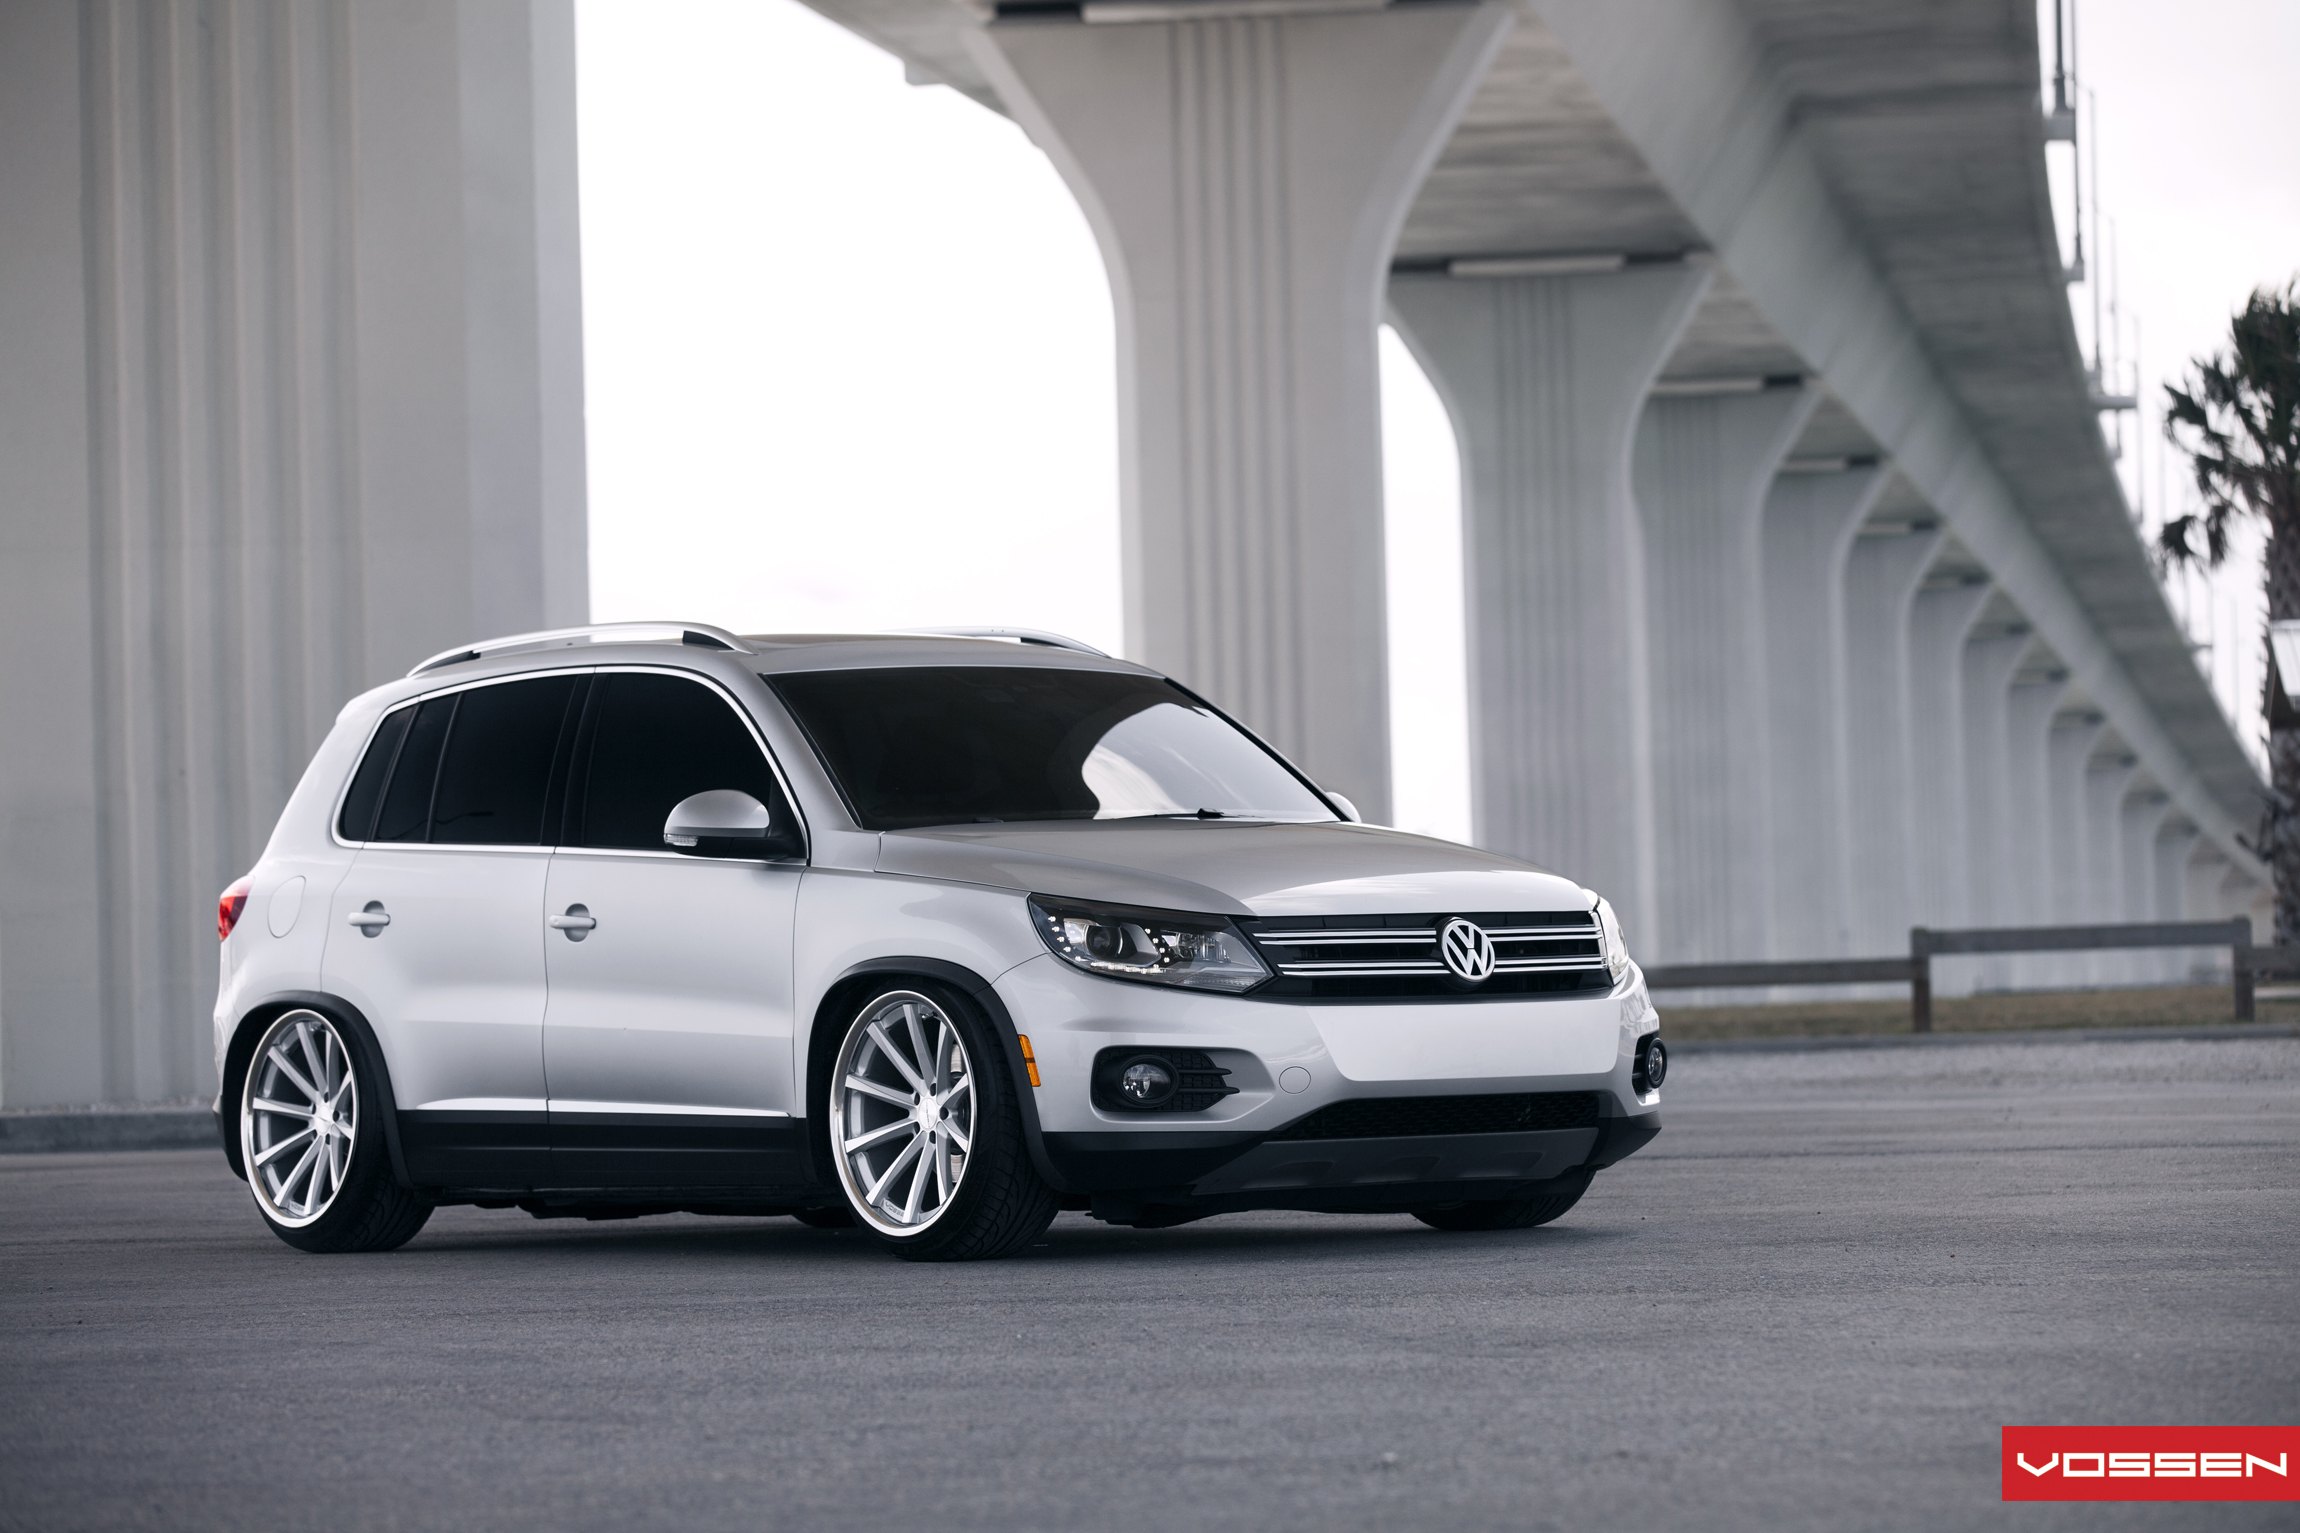 Silver VW Tiguan with Custom Bumper Guard - Photo by Vossen